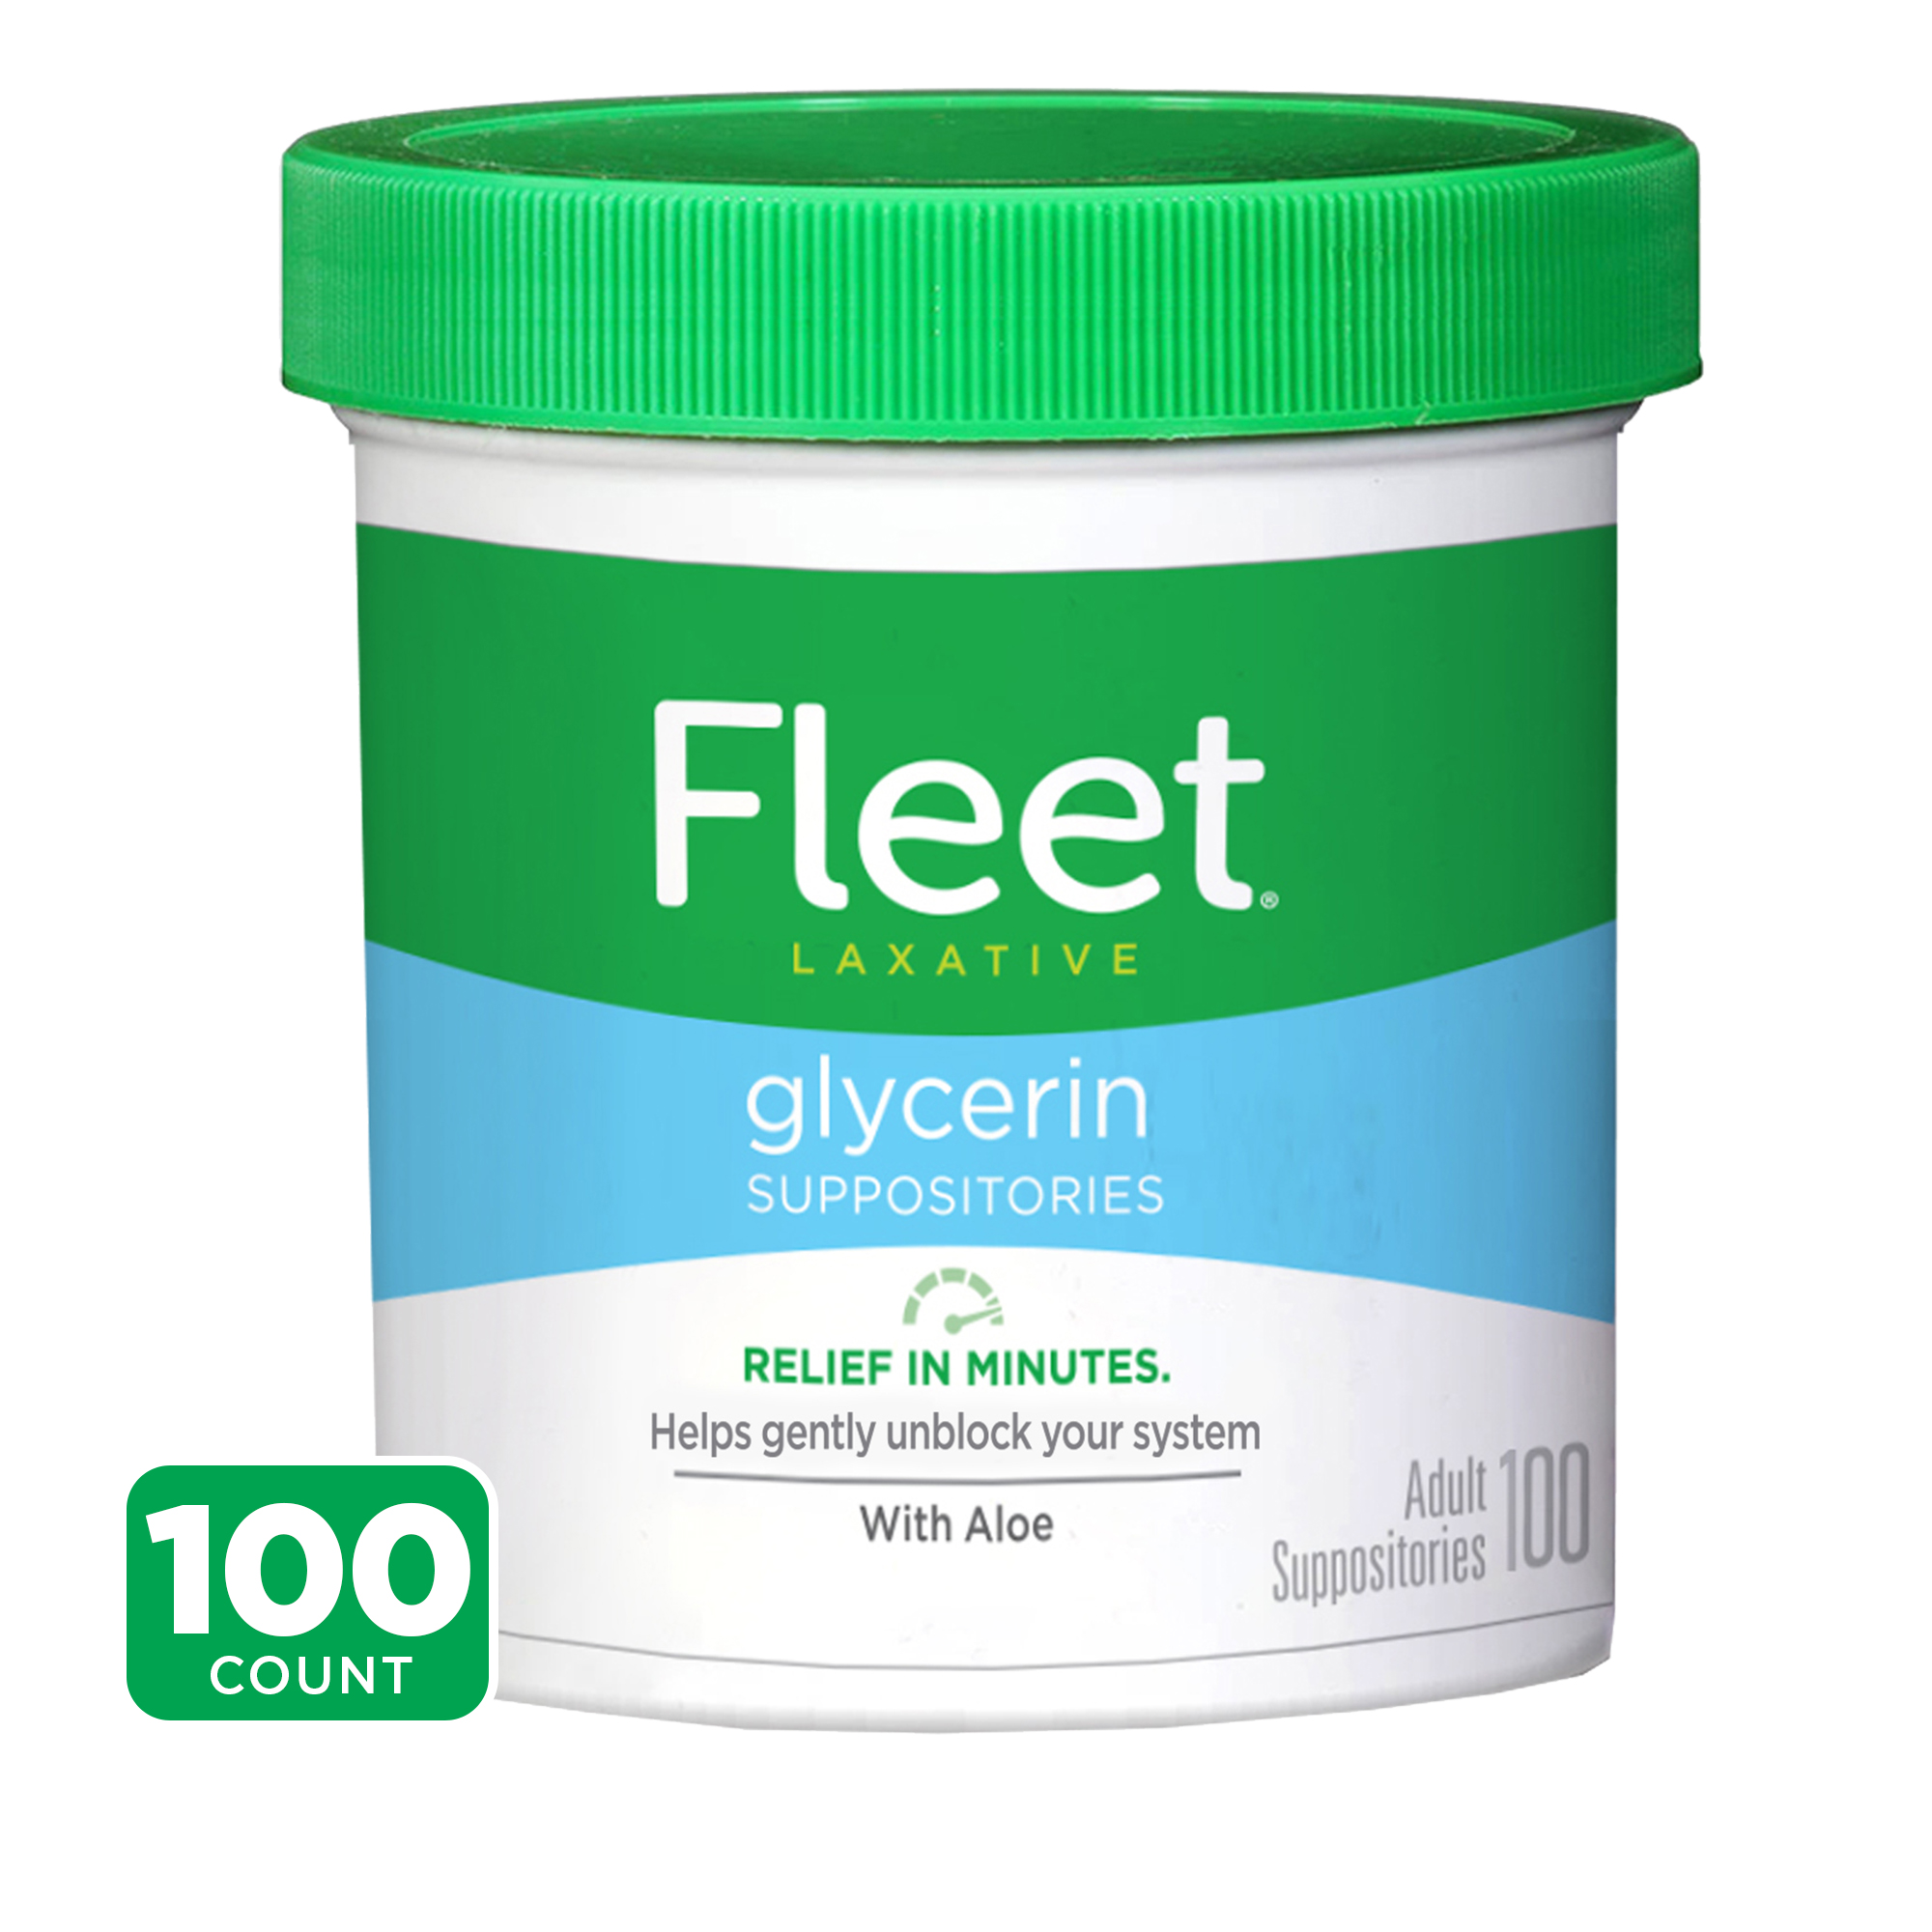 Fleet Laxative Glycerin Suppositories Adult Suppositories, 100 Count - image 1 of 13